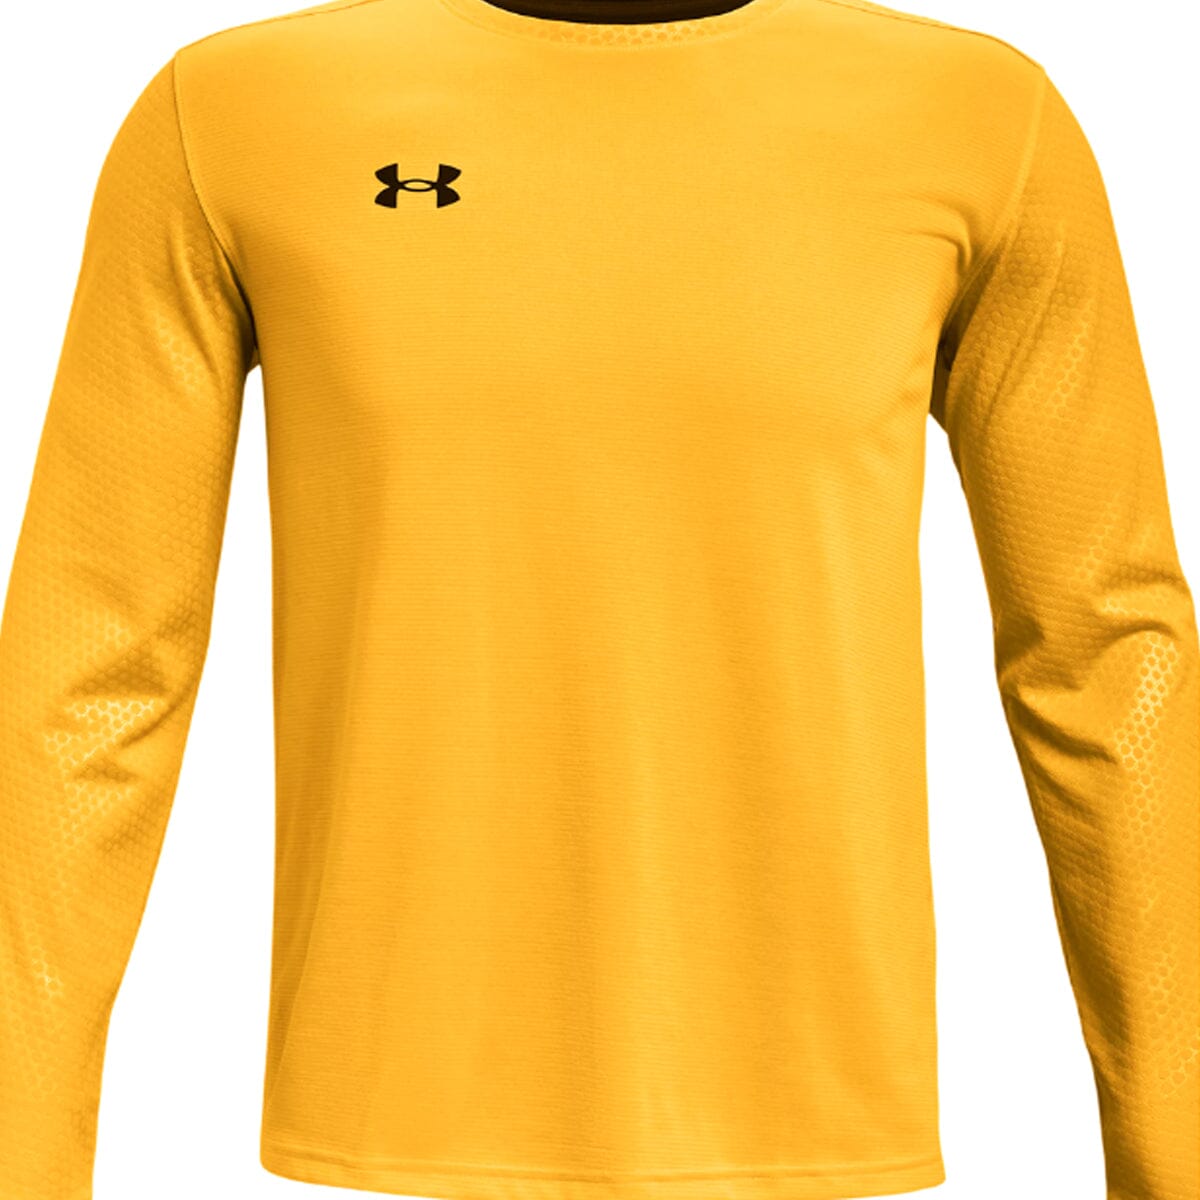 Under Armour Youth UA Wall Goalkeeper Jersey |1364967 Jersey Under Armour Youth Medium Steeltown Gold / Black 